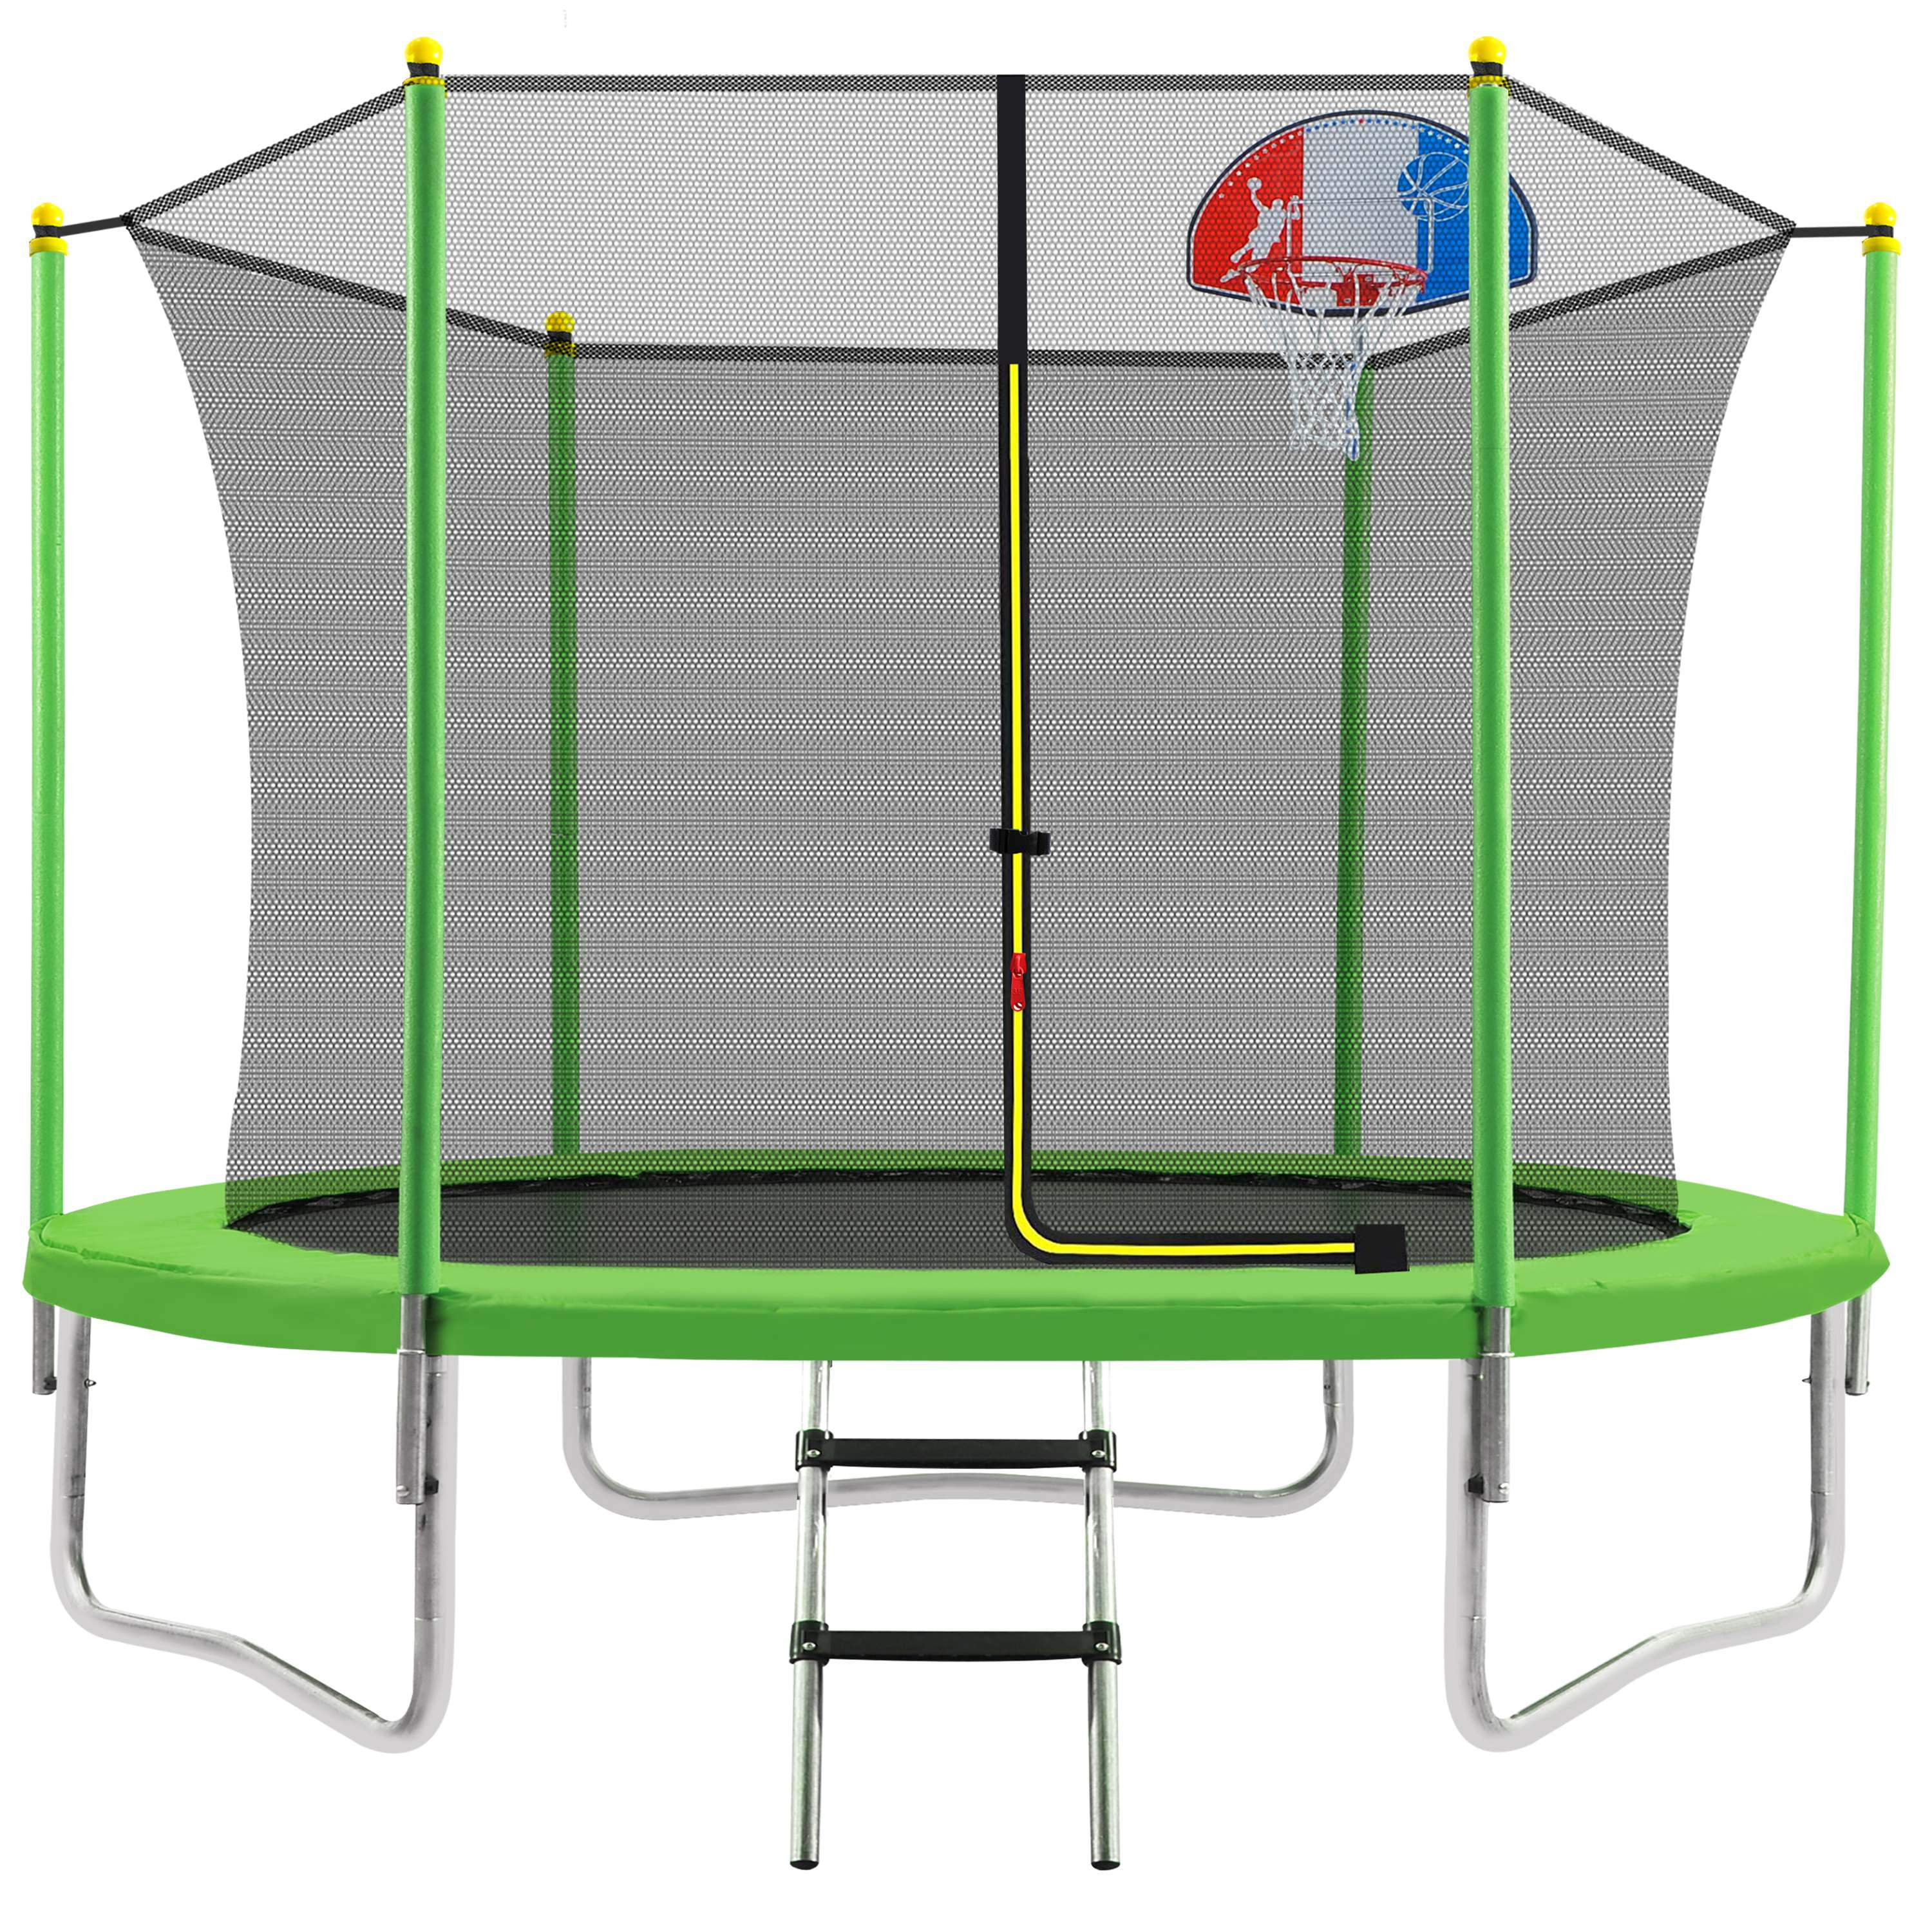 moobody 10FT Trampoline for Kids with Safety Enclosure Net, Basketball Hoop and Ladder, Easy Assembly Round Outdoor Recreational Trampoline